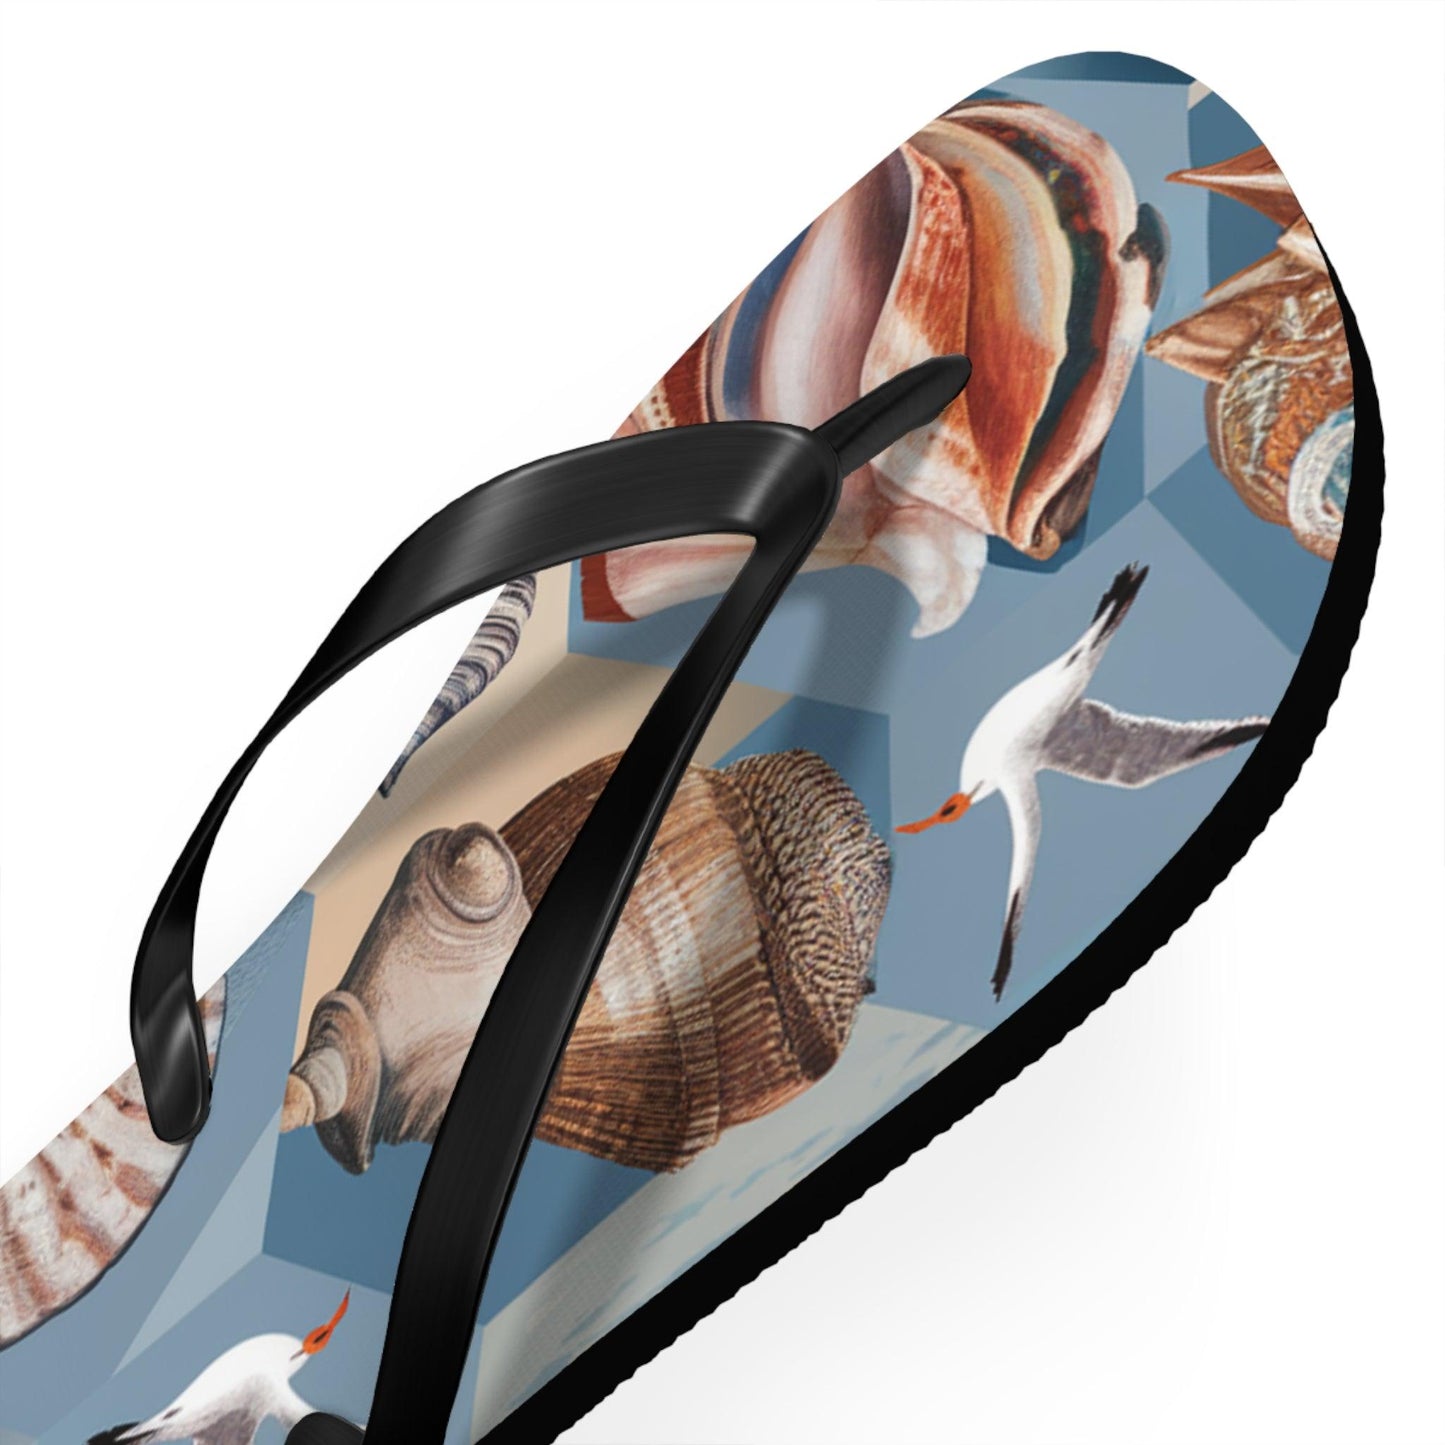 Seashell and Seagull Inspired Flip Flops v3, Express Your Beach Loving Self - Coastal Collections